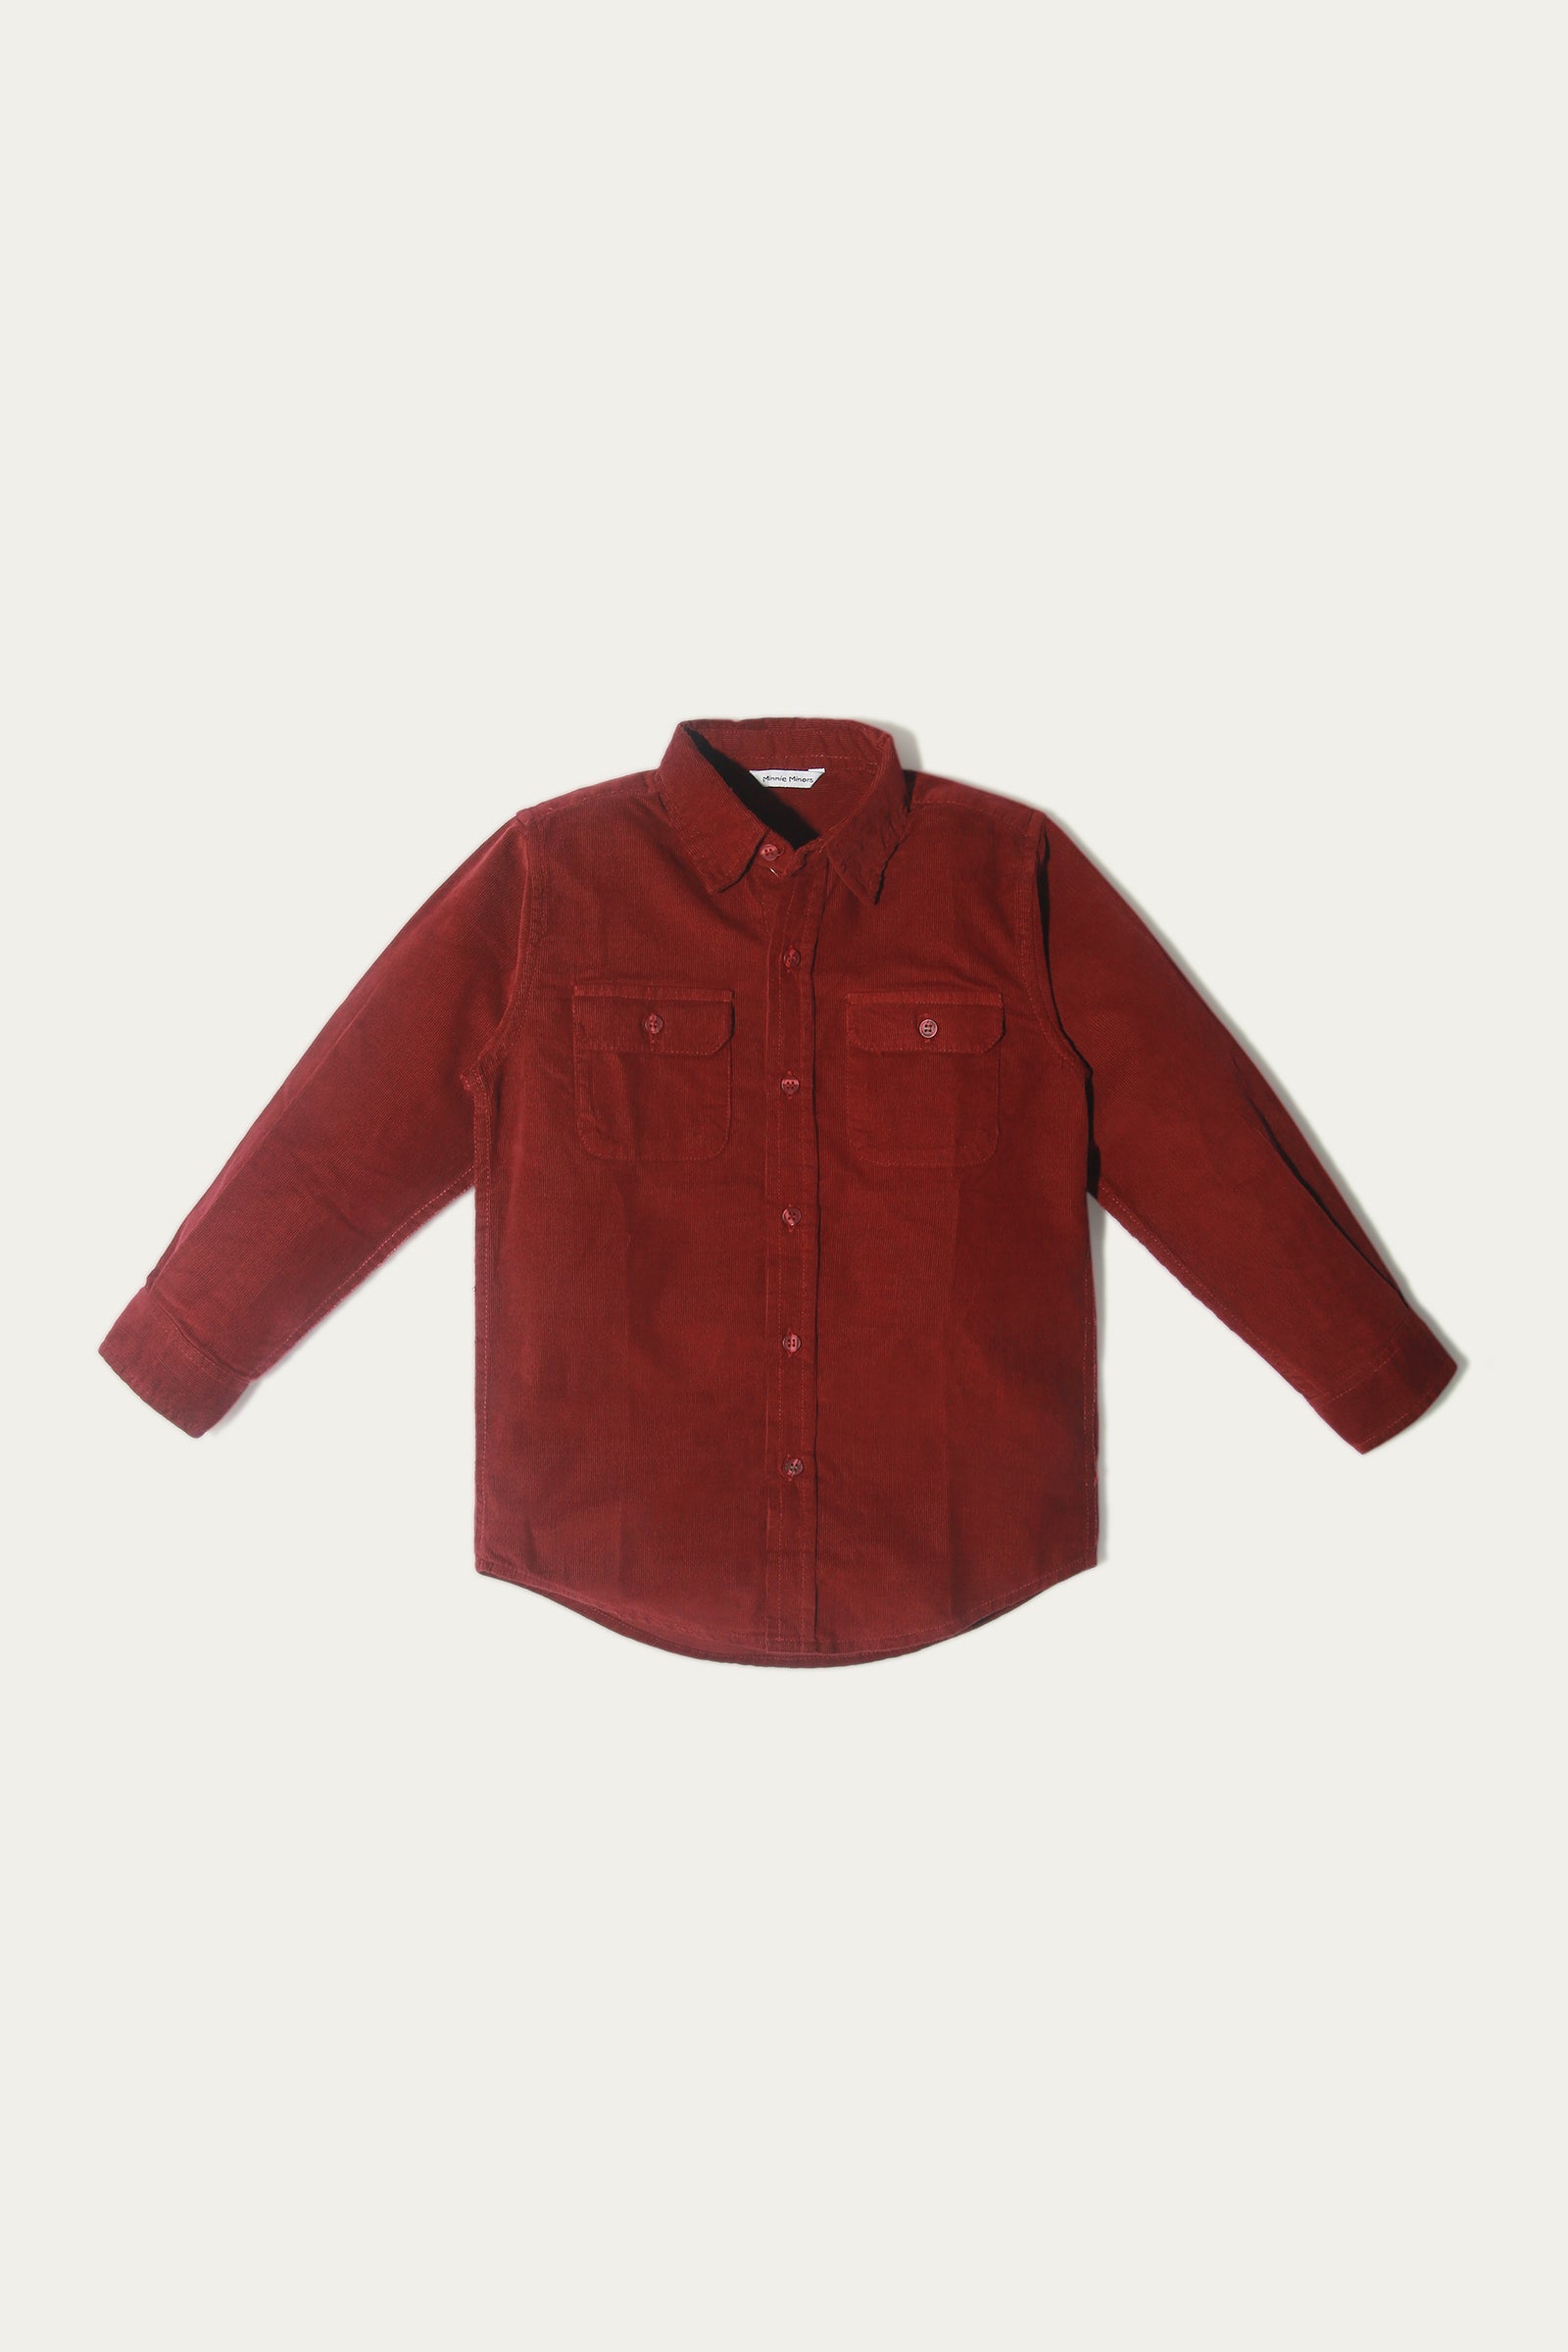 SHIRT WITH FLAP POCKET (MSWBS-013)